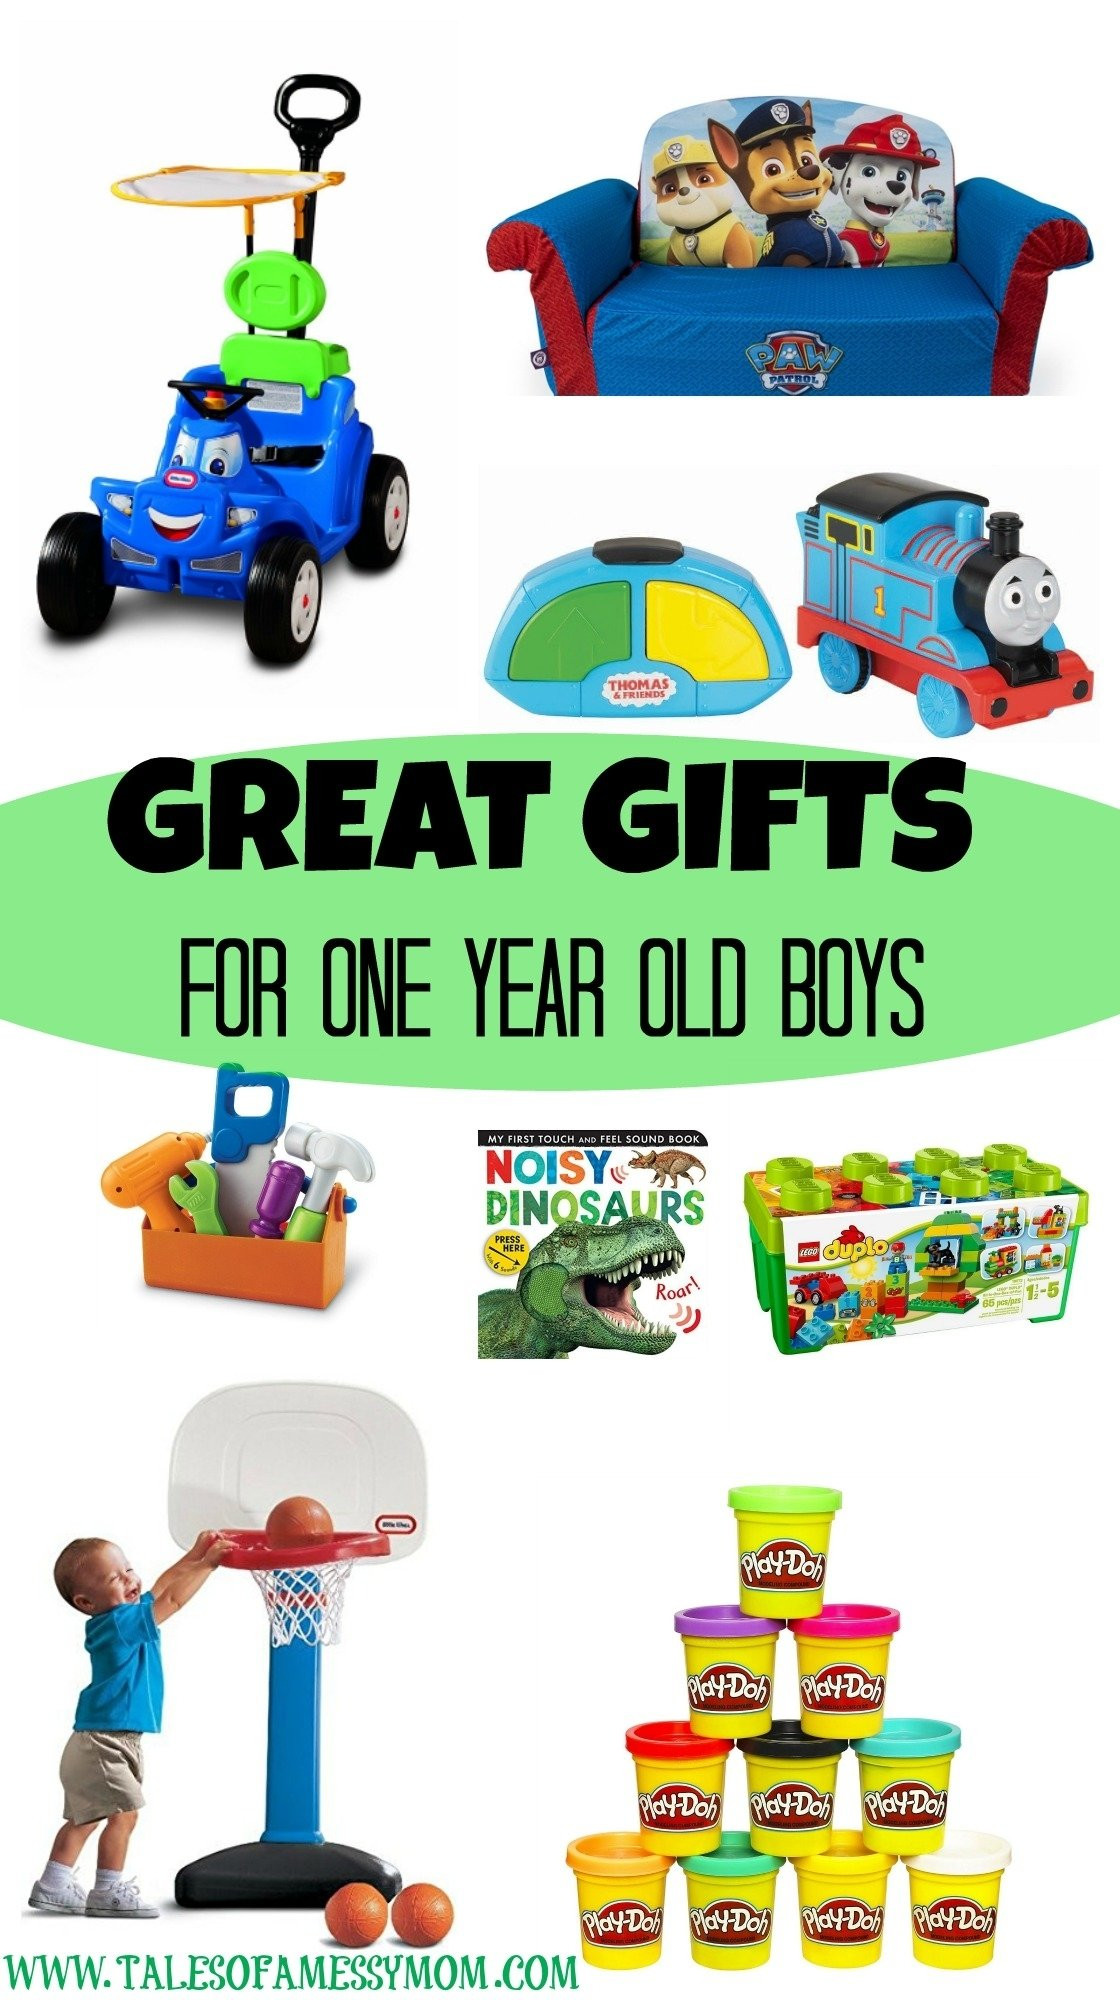 Good Gift Ideas For Boys
 10 Great Gift Ideas For A e Year Old Boy 2021